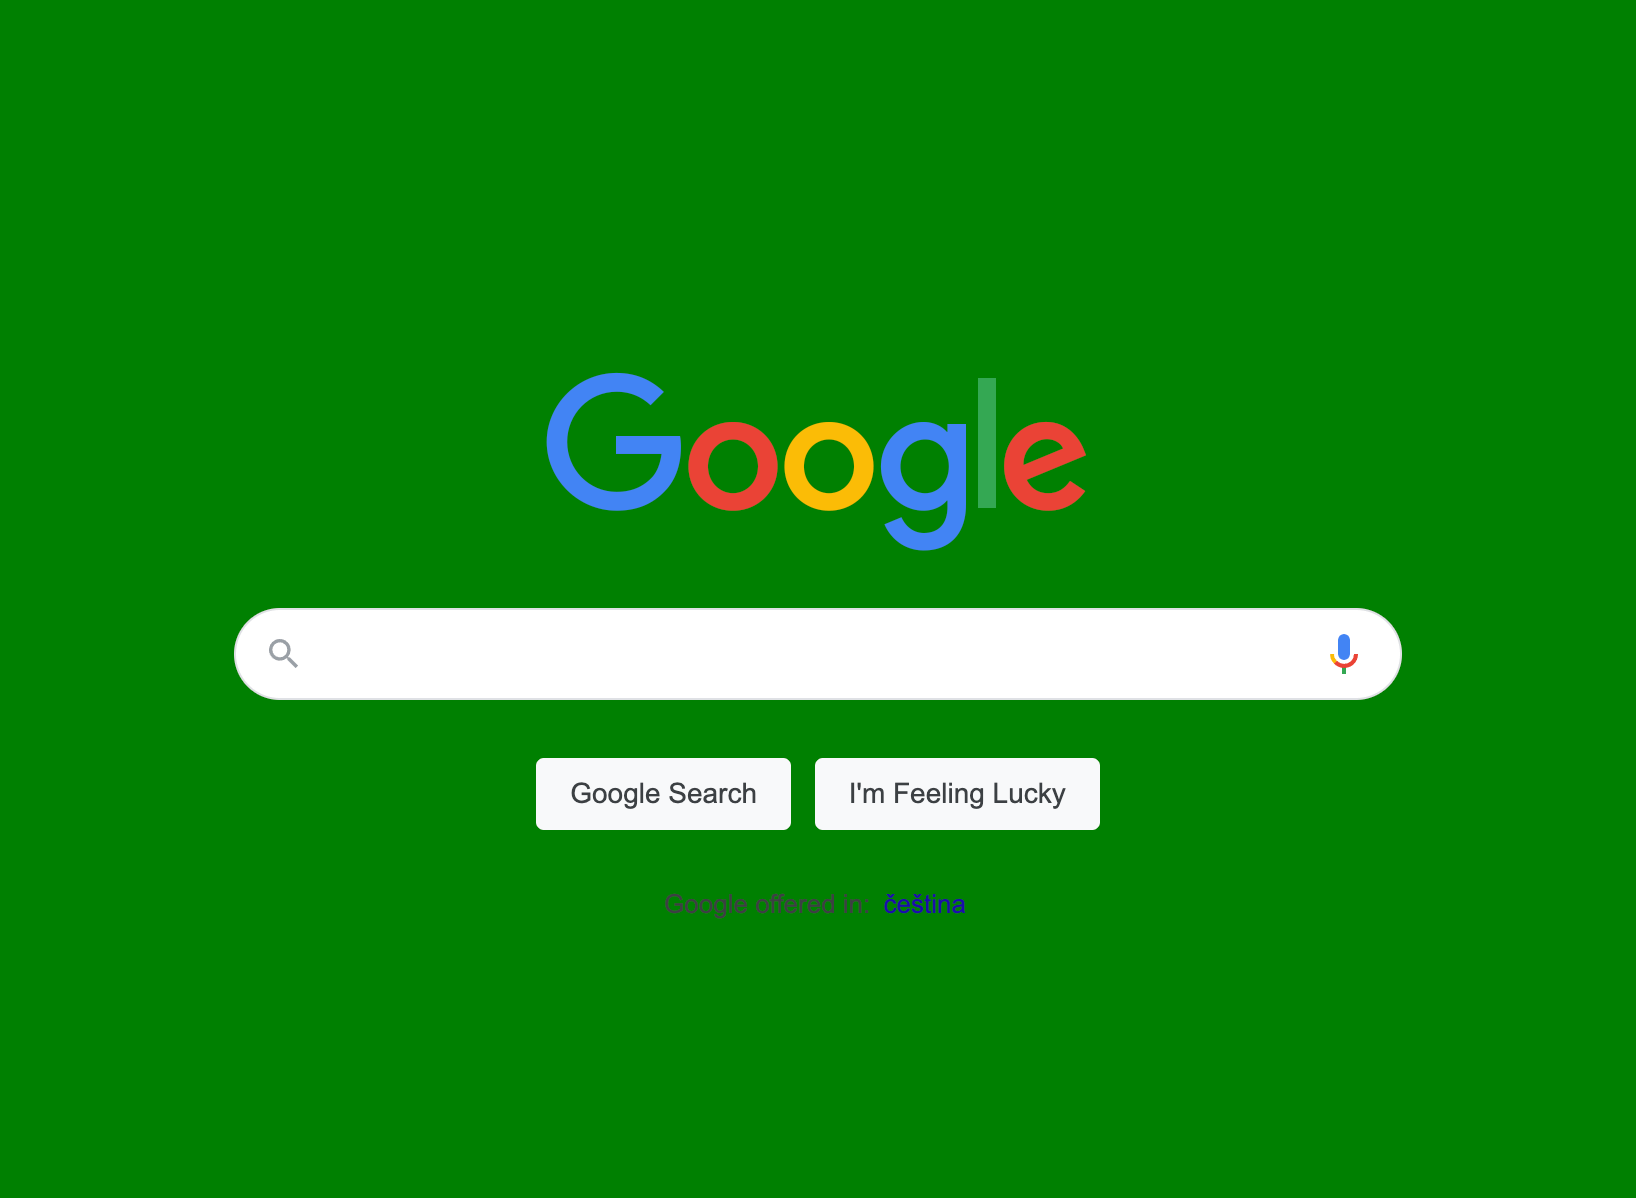 Google with the background color changed to green